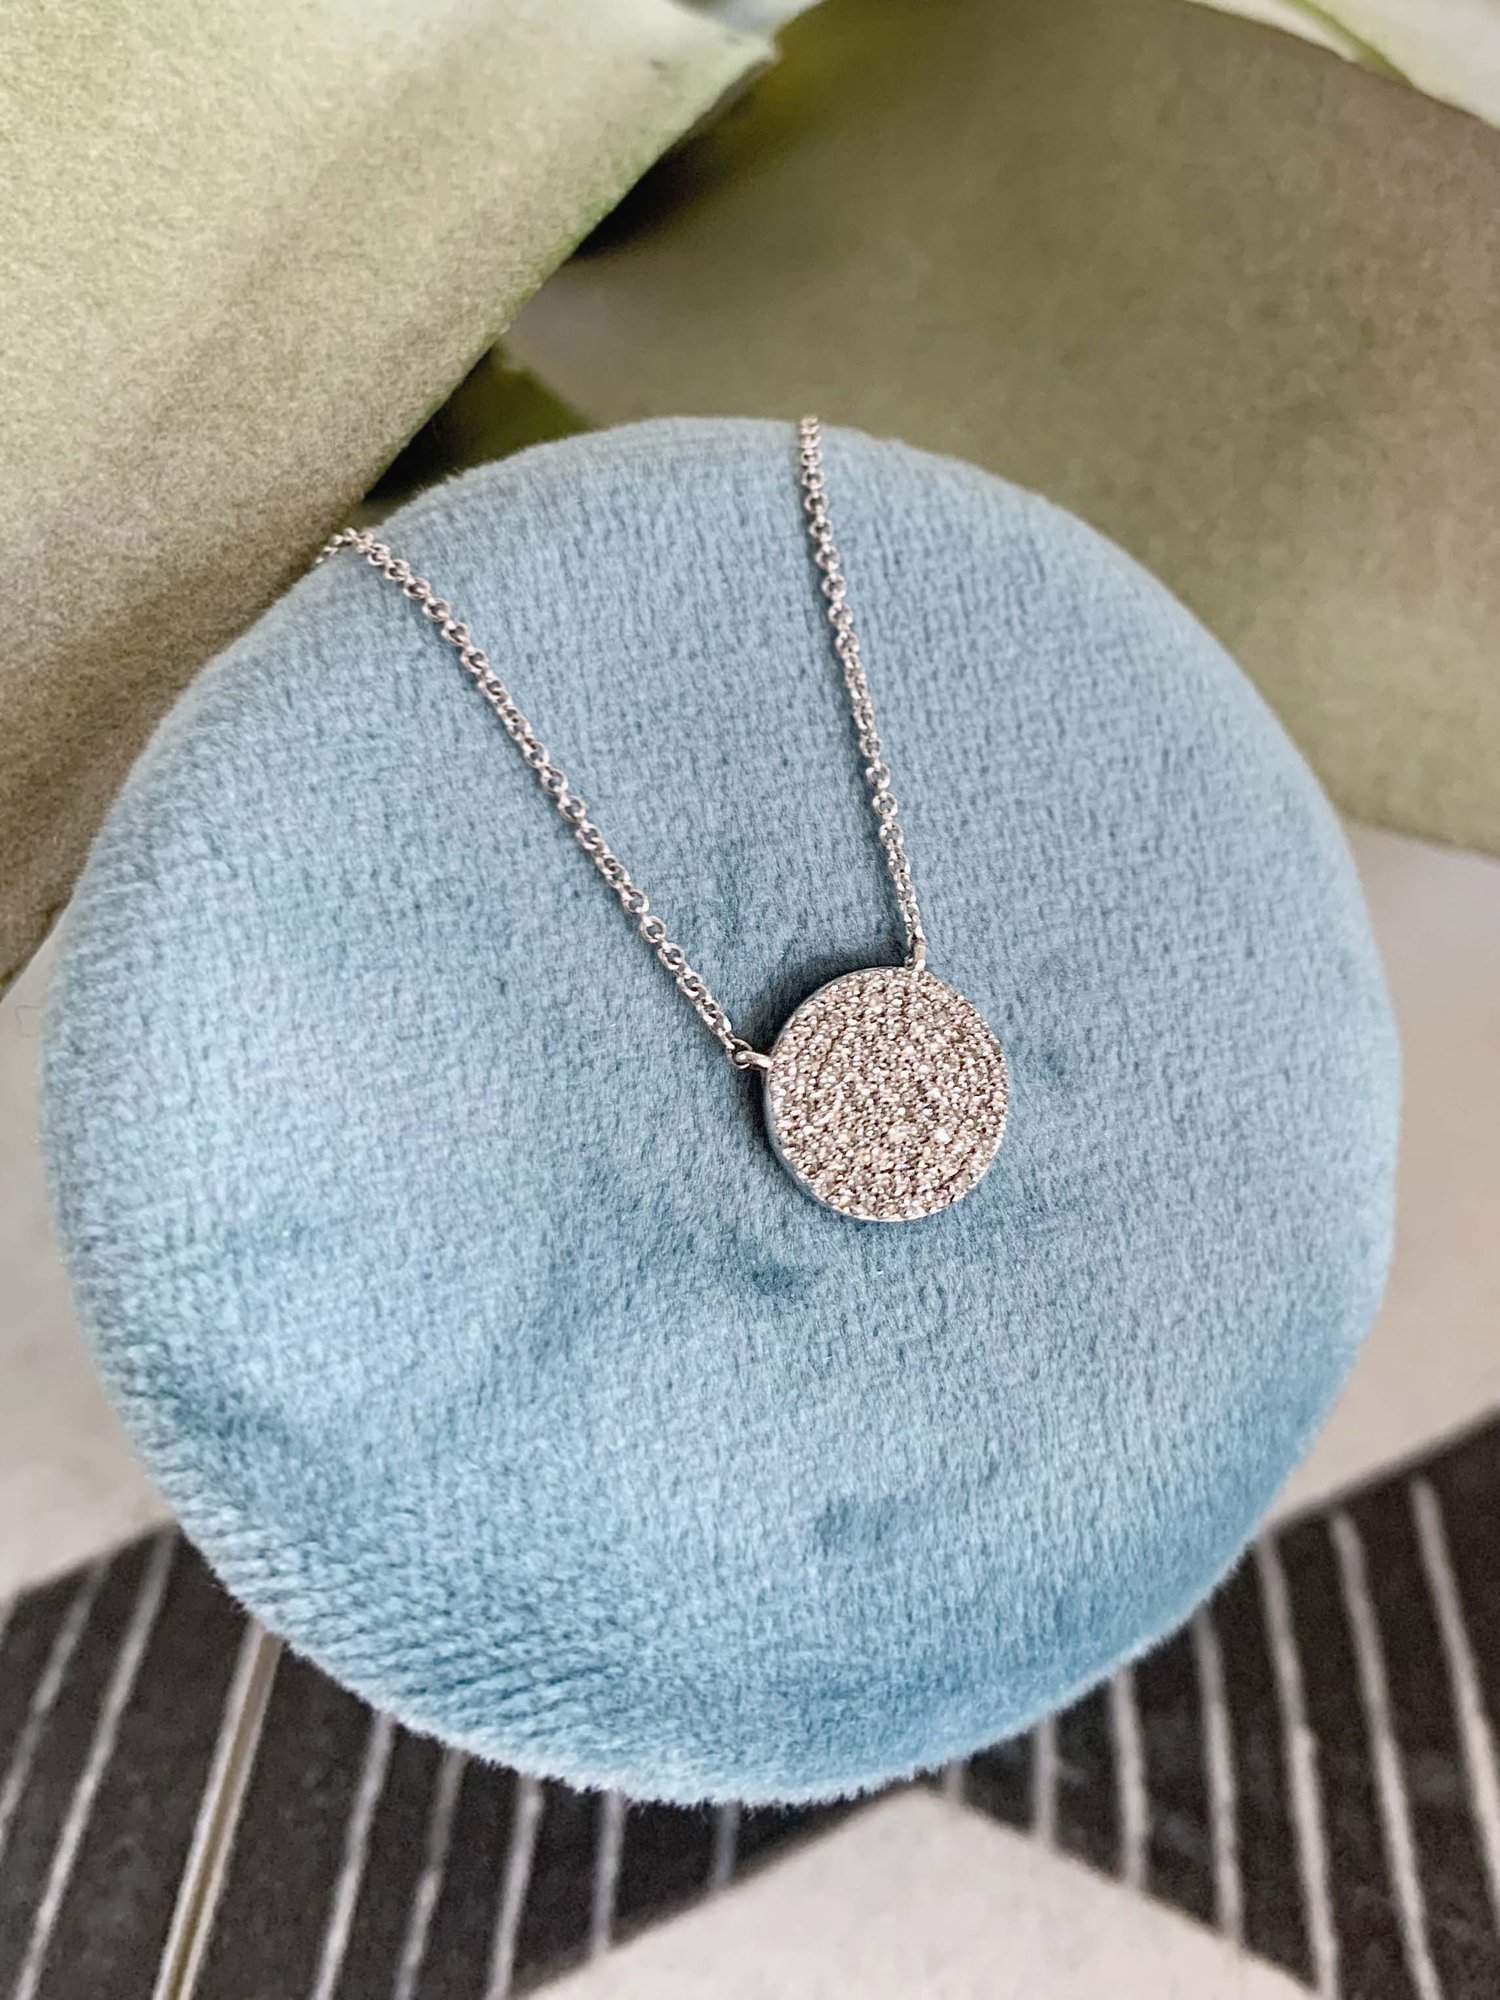 14k White Gold Pave Diamond Dot Necklace — Gold Necklaces, Ooh Aah Jewelry, Nob Hill, Albuquerque, United States